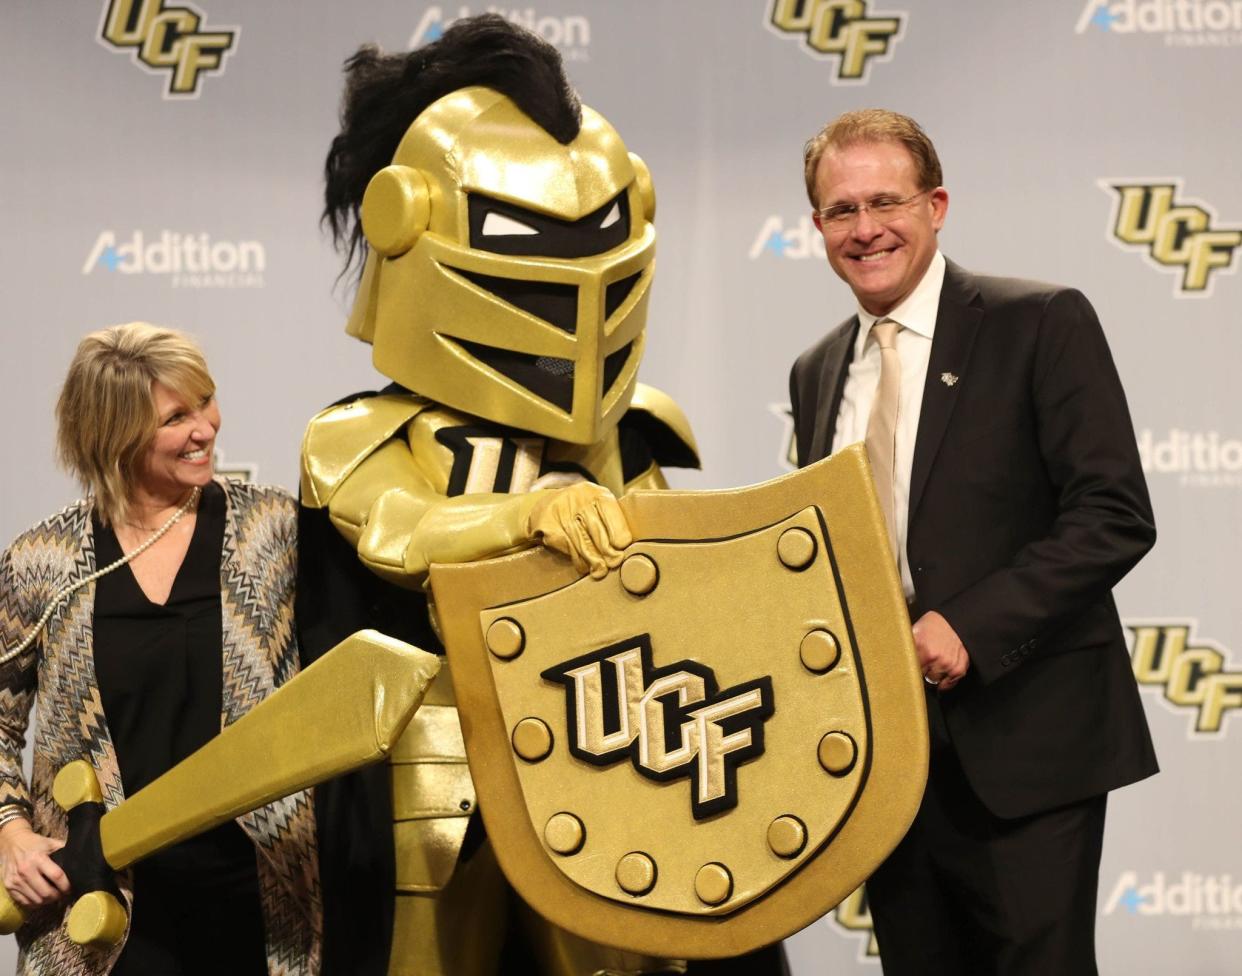 UCF football coach Gus Malzahn, seen here with team mascot Knightro and his wife, Kristi, at his introductory press conference, will have a huge opportunity to upgrade his program with the school gaining Power 5 status as a new member of the Big 12 Conference.